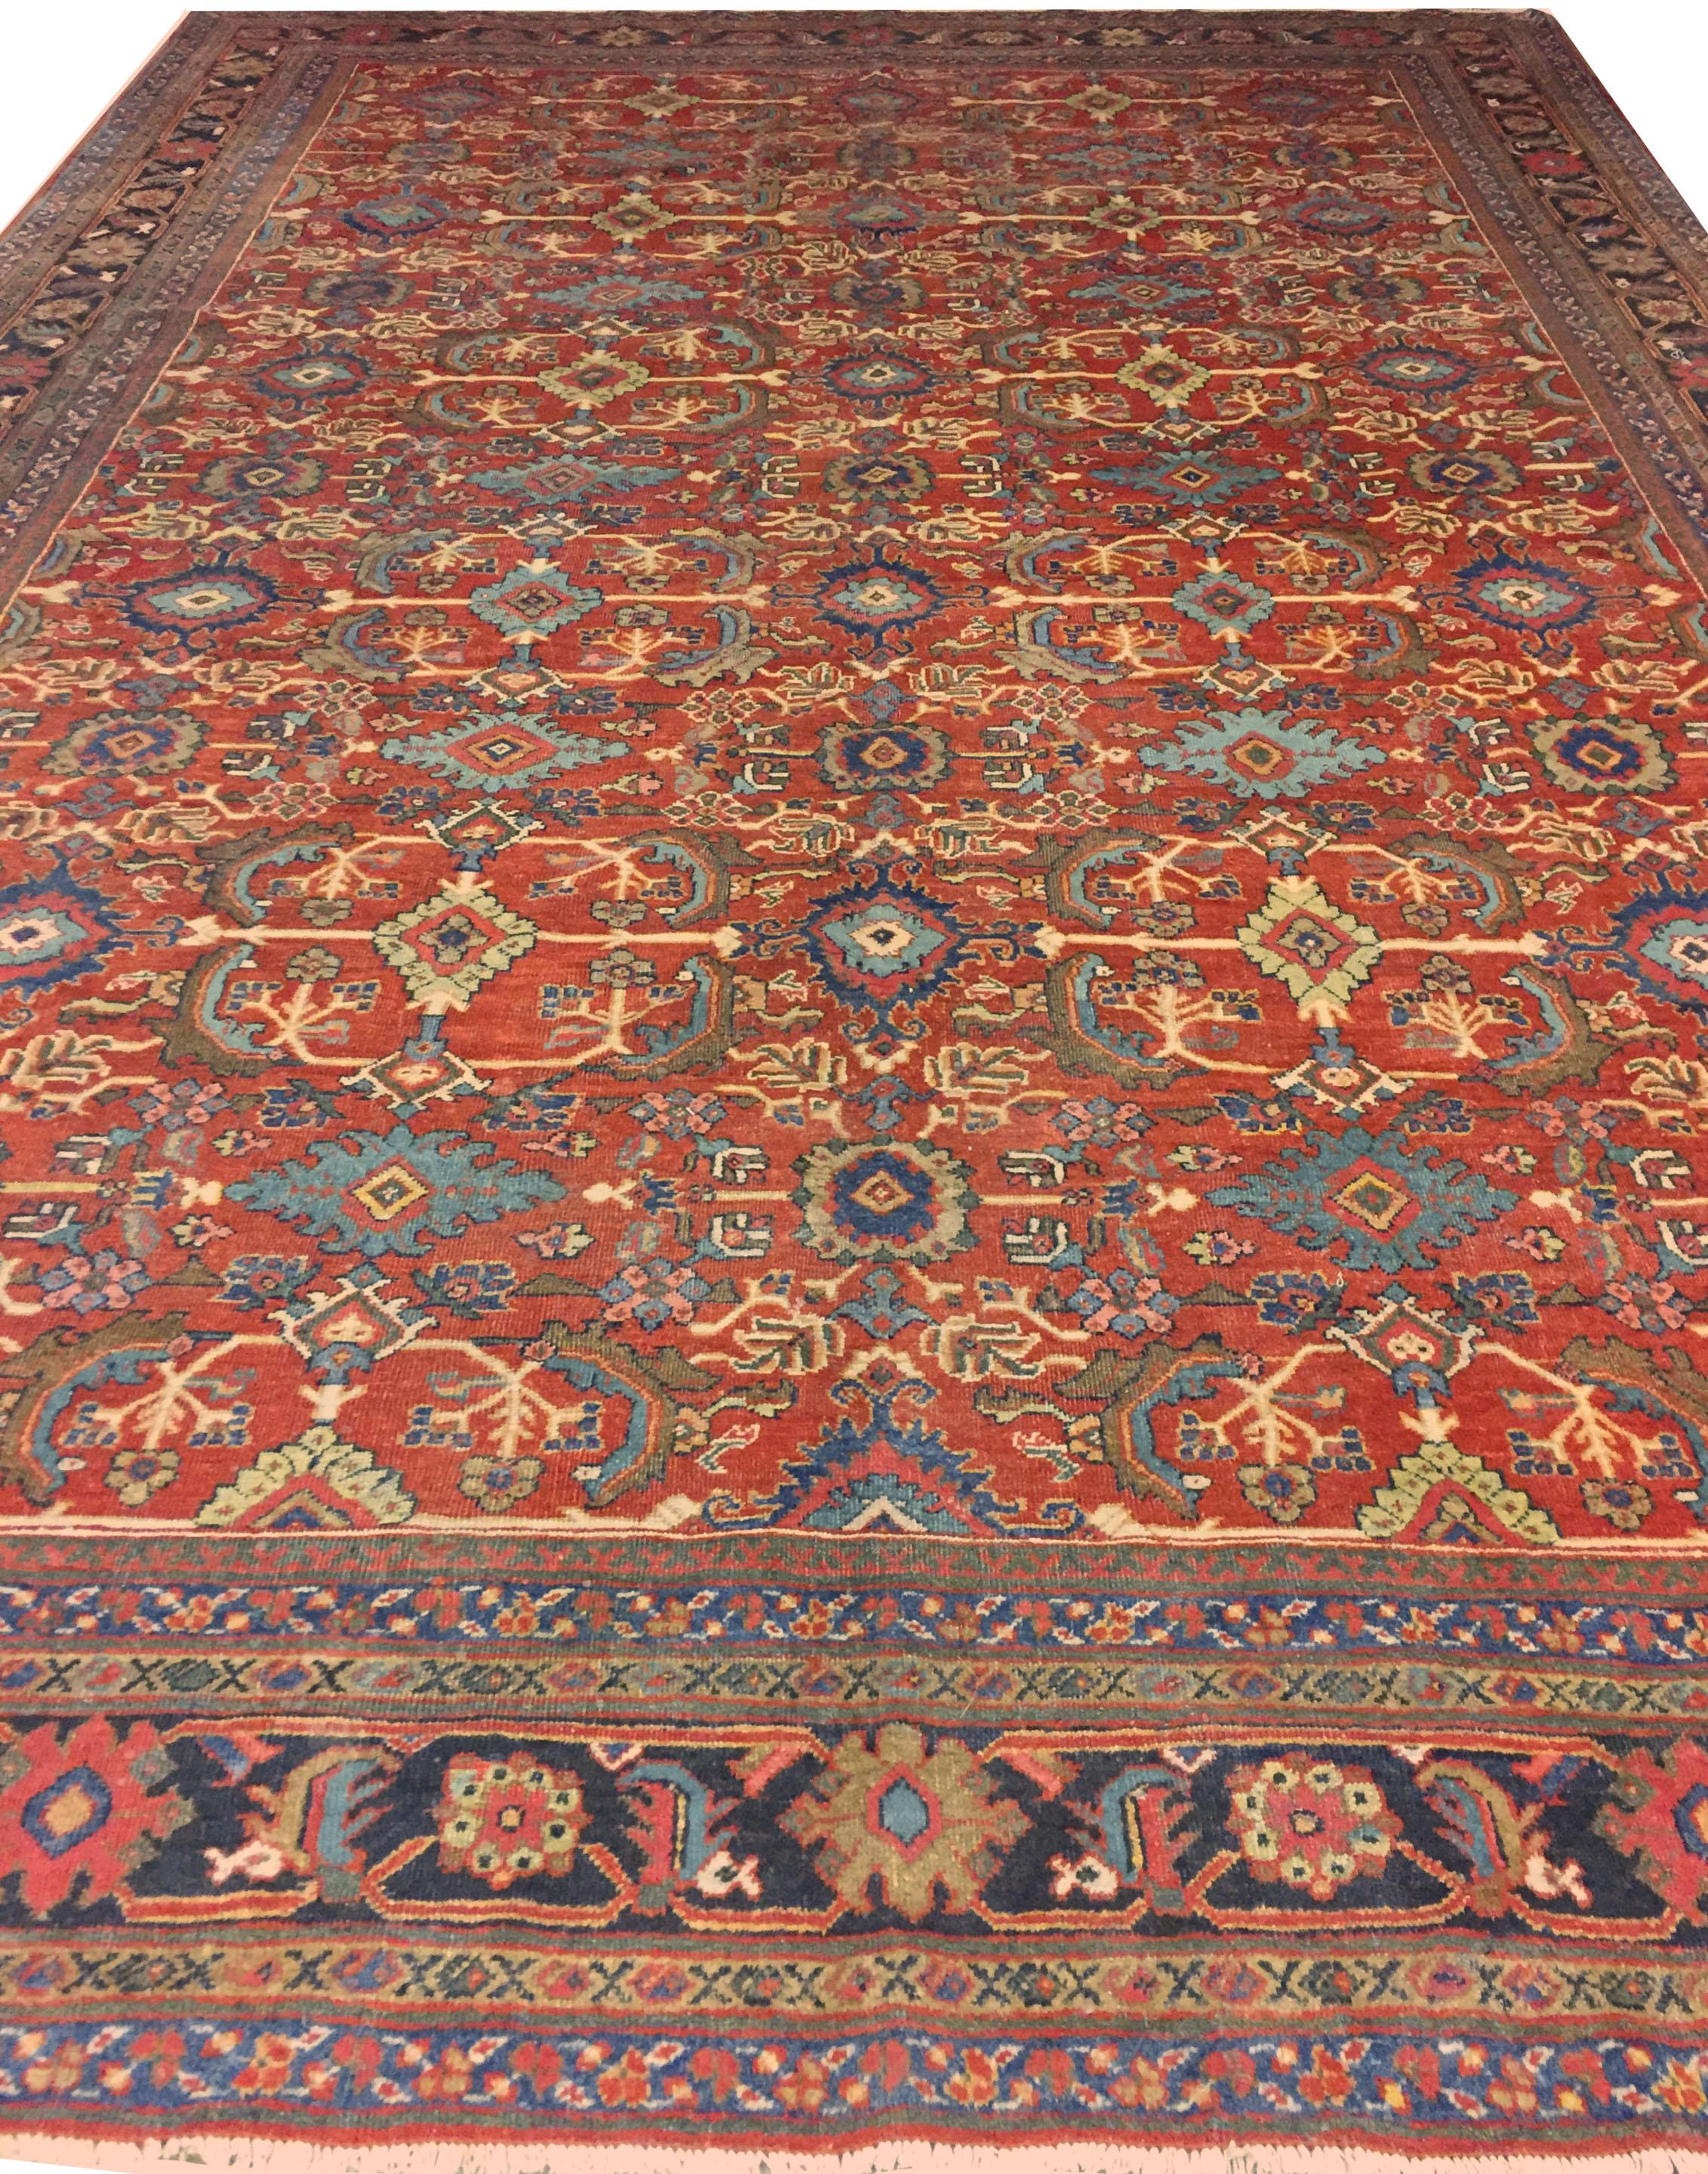 Antique Mahal Sultanabad carpet rug, 9'8 x 14'6. Symmetrical floral patterns climb up the brick red central field of this antique Mahal rug from Persia. Polychromatic floral and vine scroll patterns create a unified pattern along the center of the